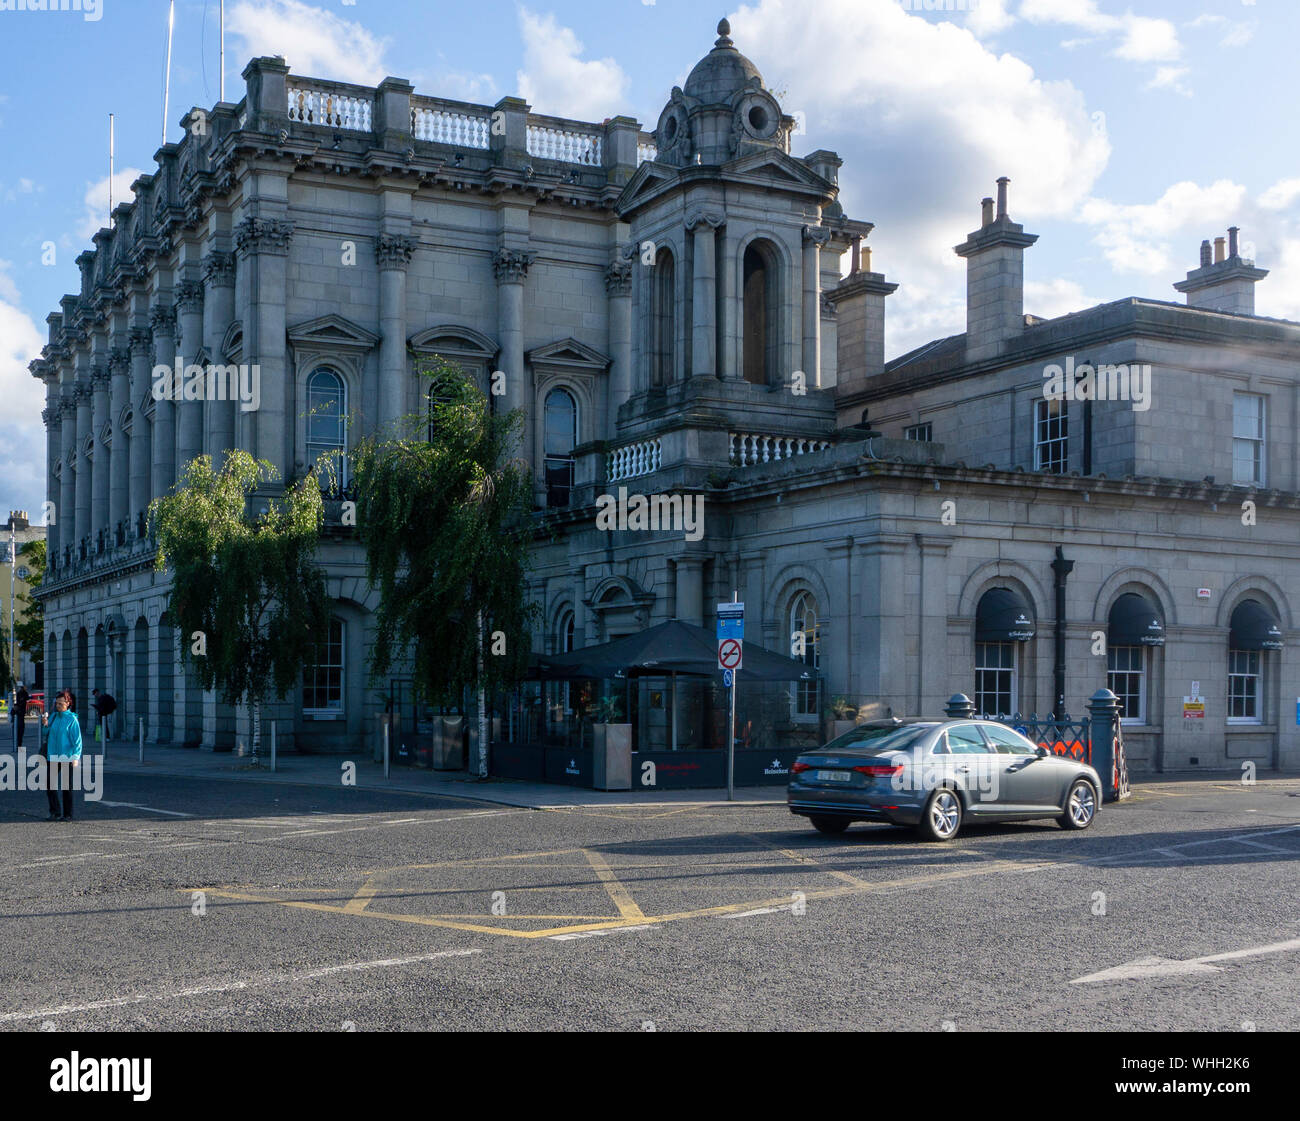 Heuston Railway Station, one of Ireland's main railway stations, linking the capital, Dublin, with the south,southwest and west of Ireland. Stock Photo